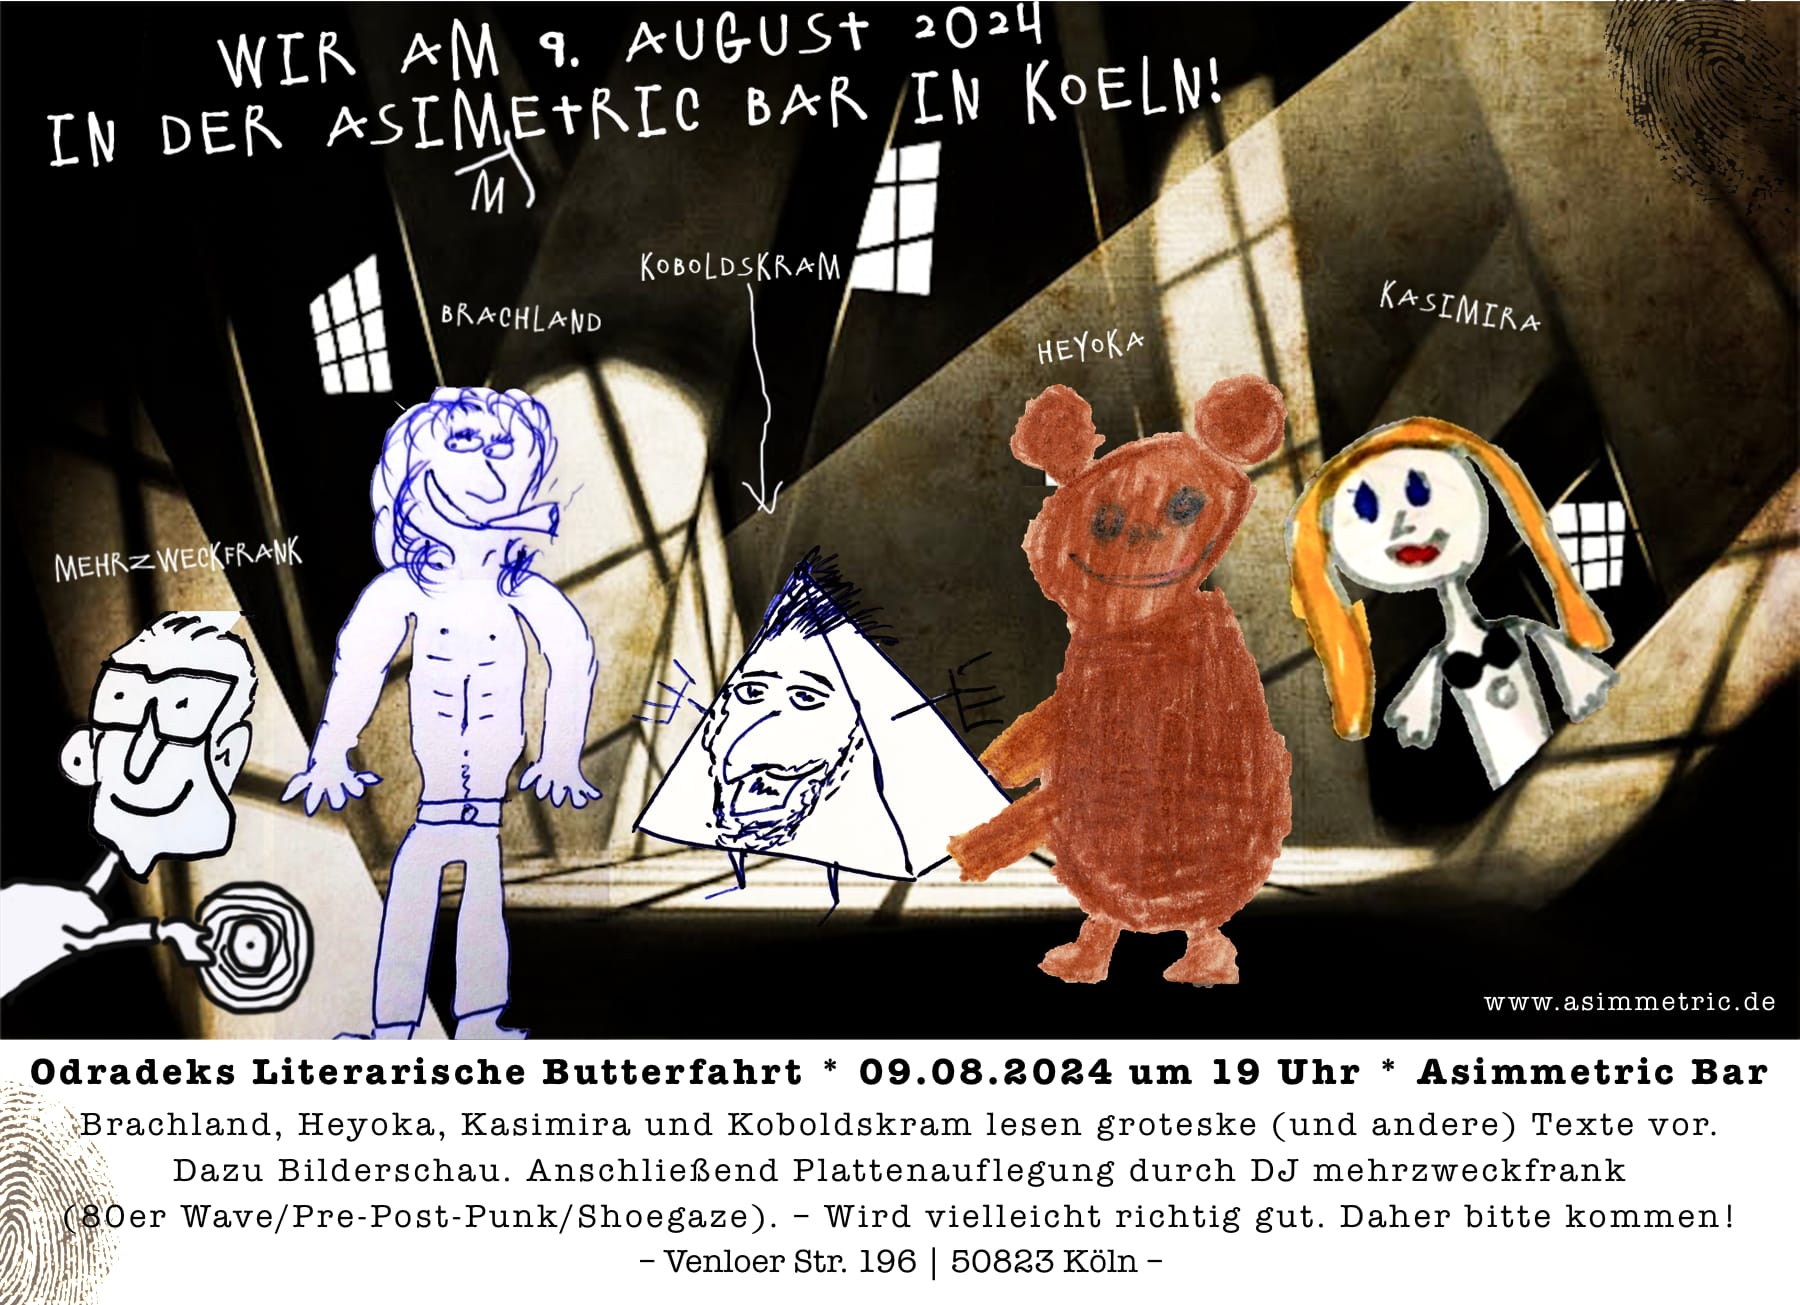 Flyer anouncing the upcoming reading in Cologne.